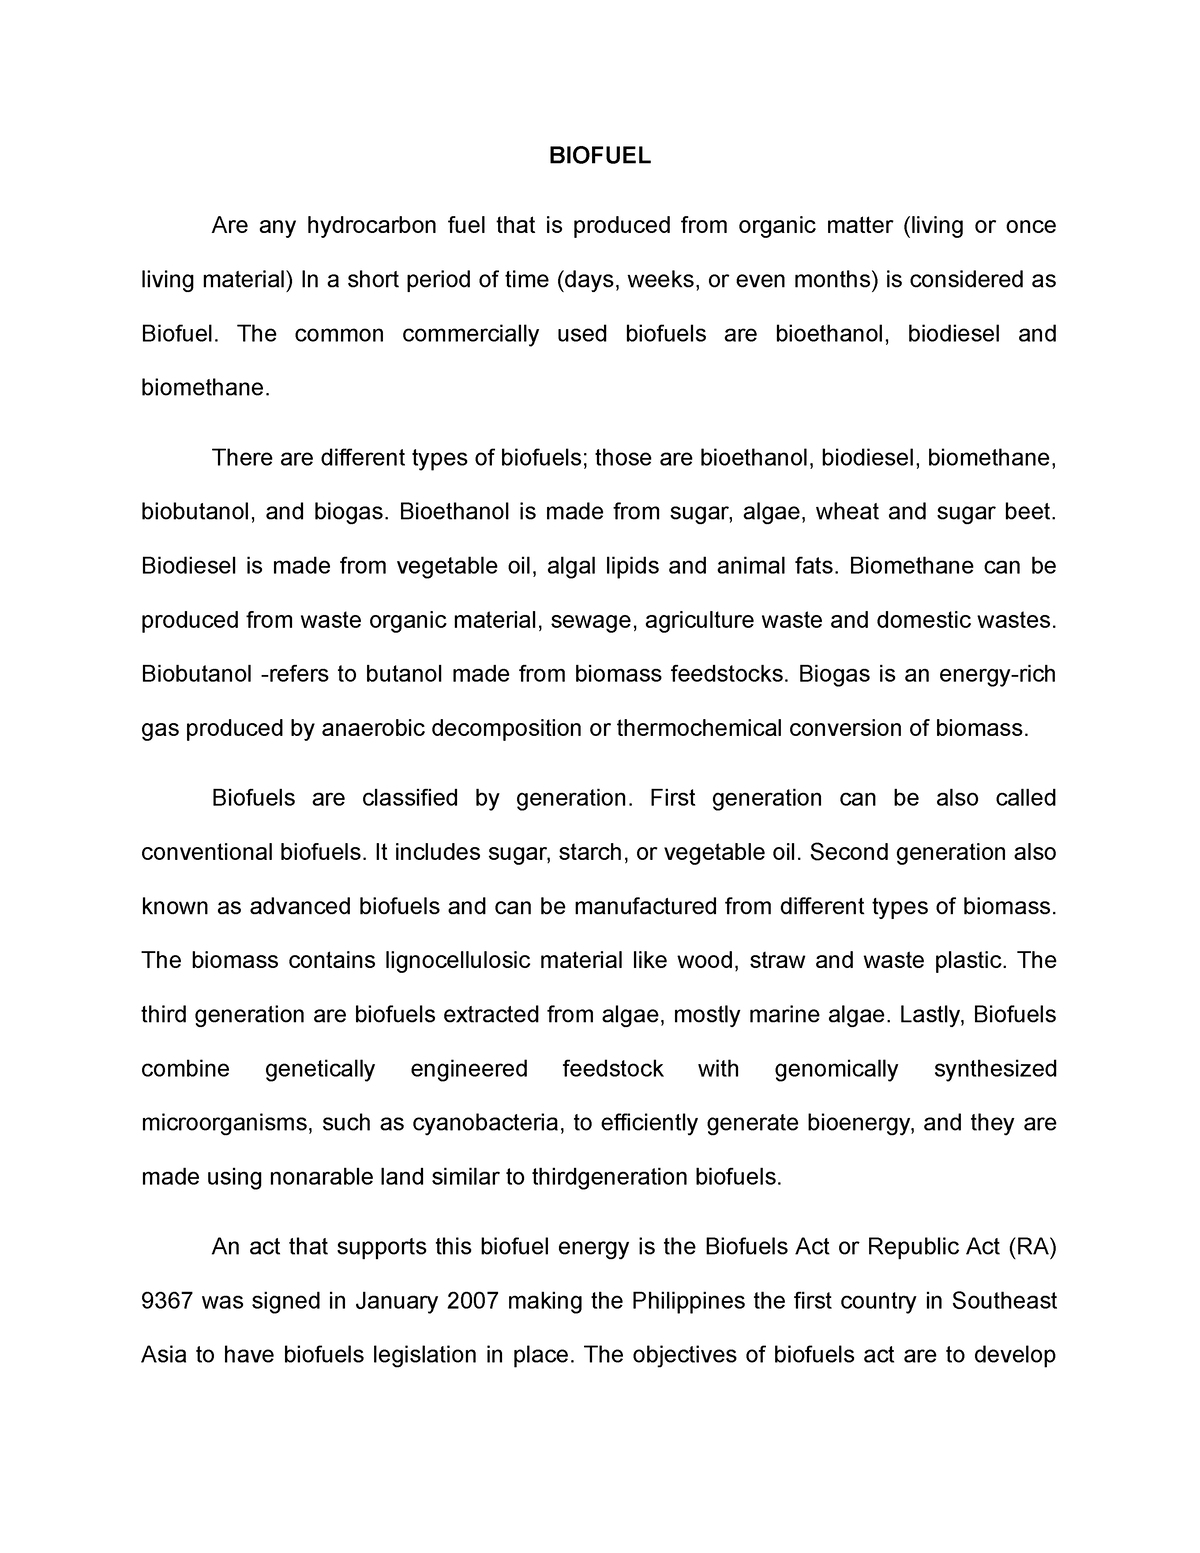 research paper about biofuels